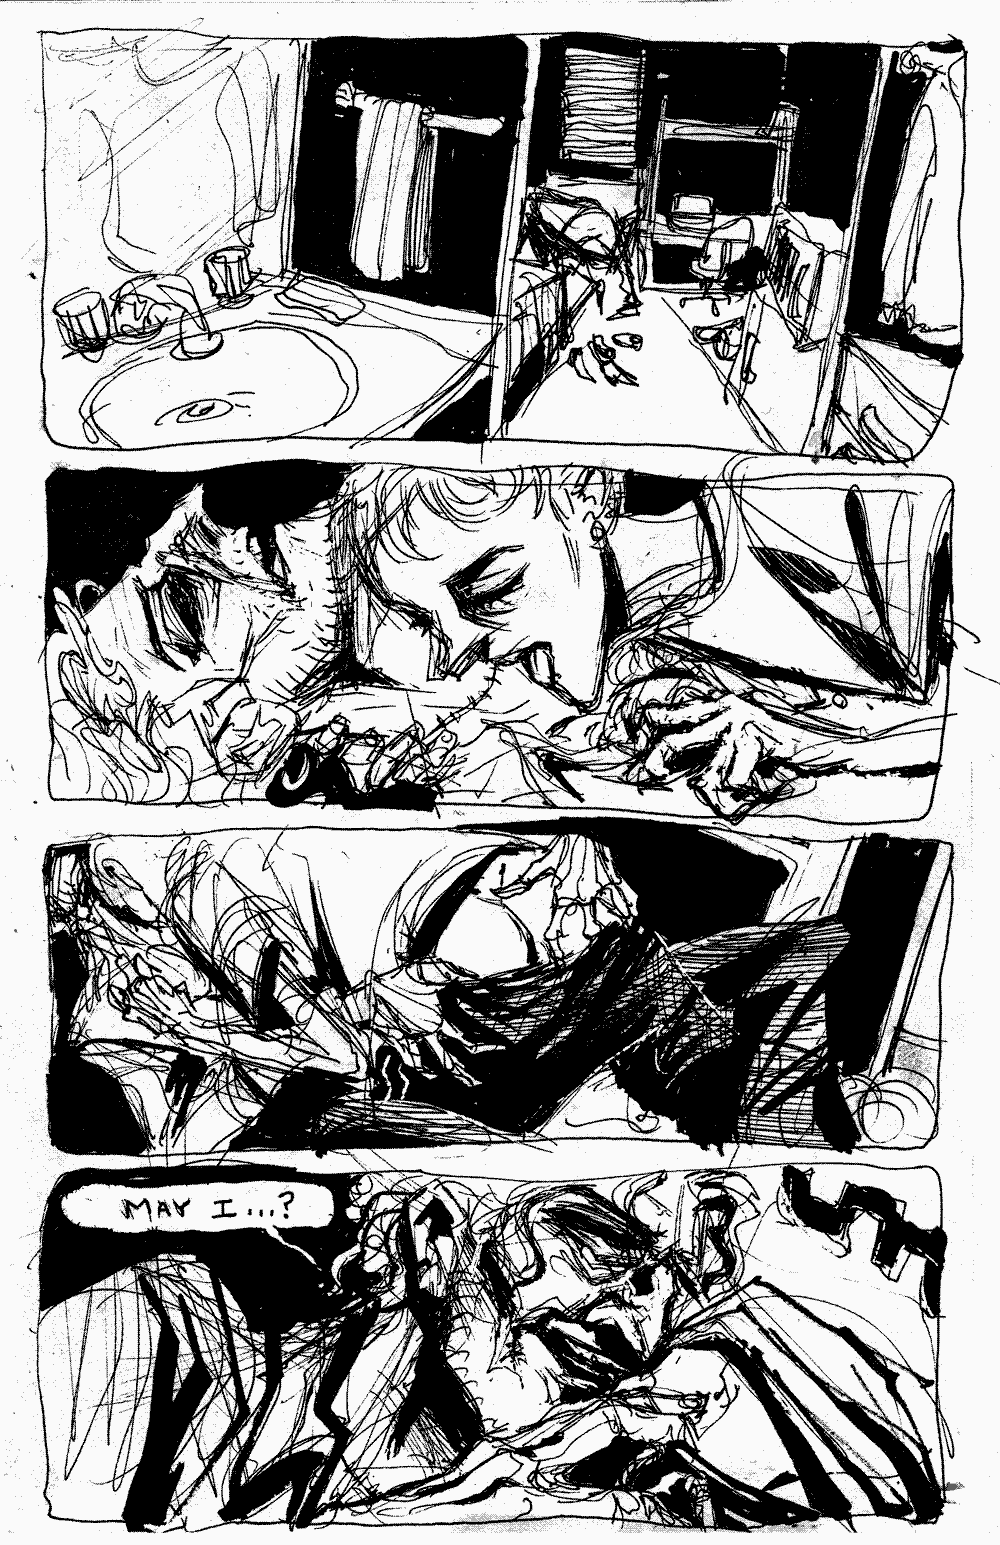 Page 3 - A view of the messy and cramped dorm room.  Smaller man kisses and sucks on older man's neck, revealing the old man's neck scars.  Older man pulls down small man's pants.  Old man asks, 'May I?' as he reaches for the front of small man's pants.